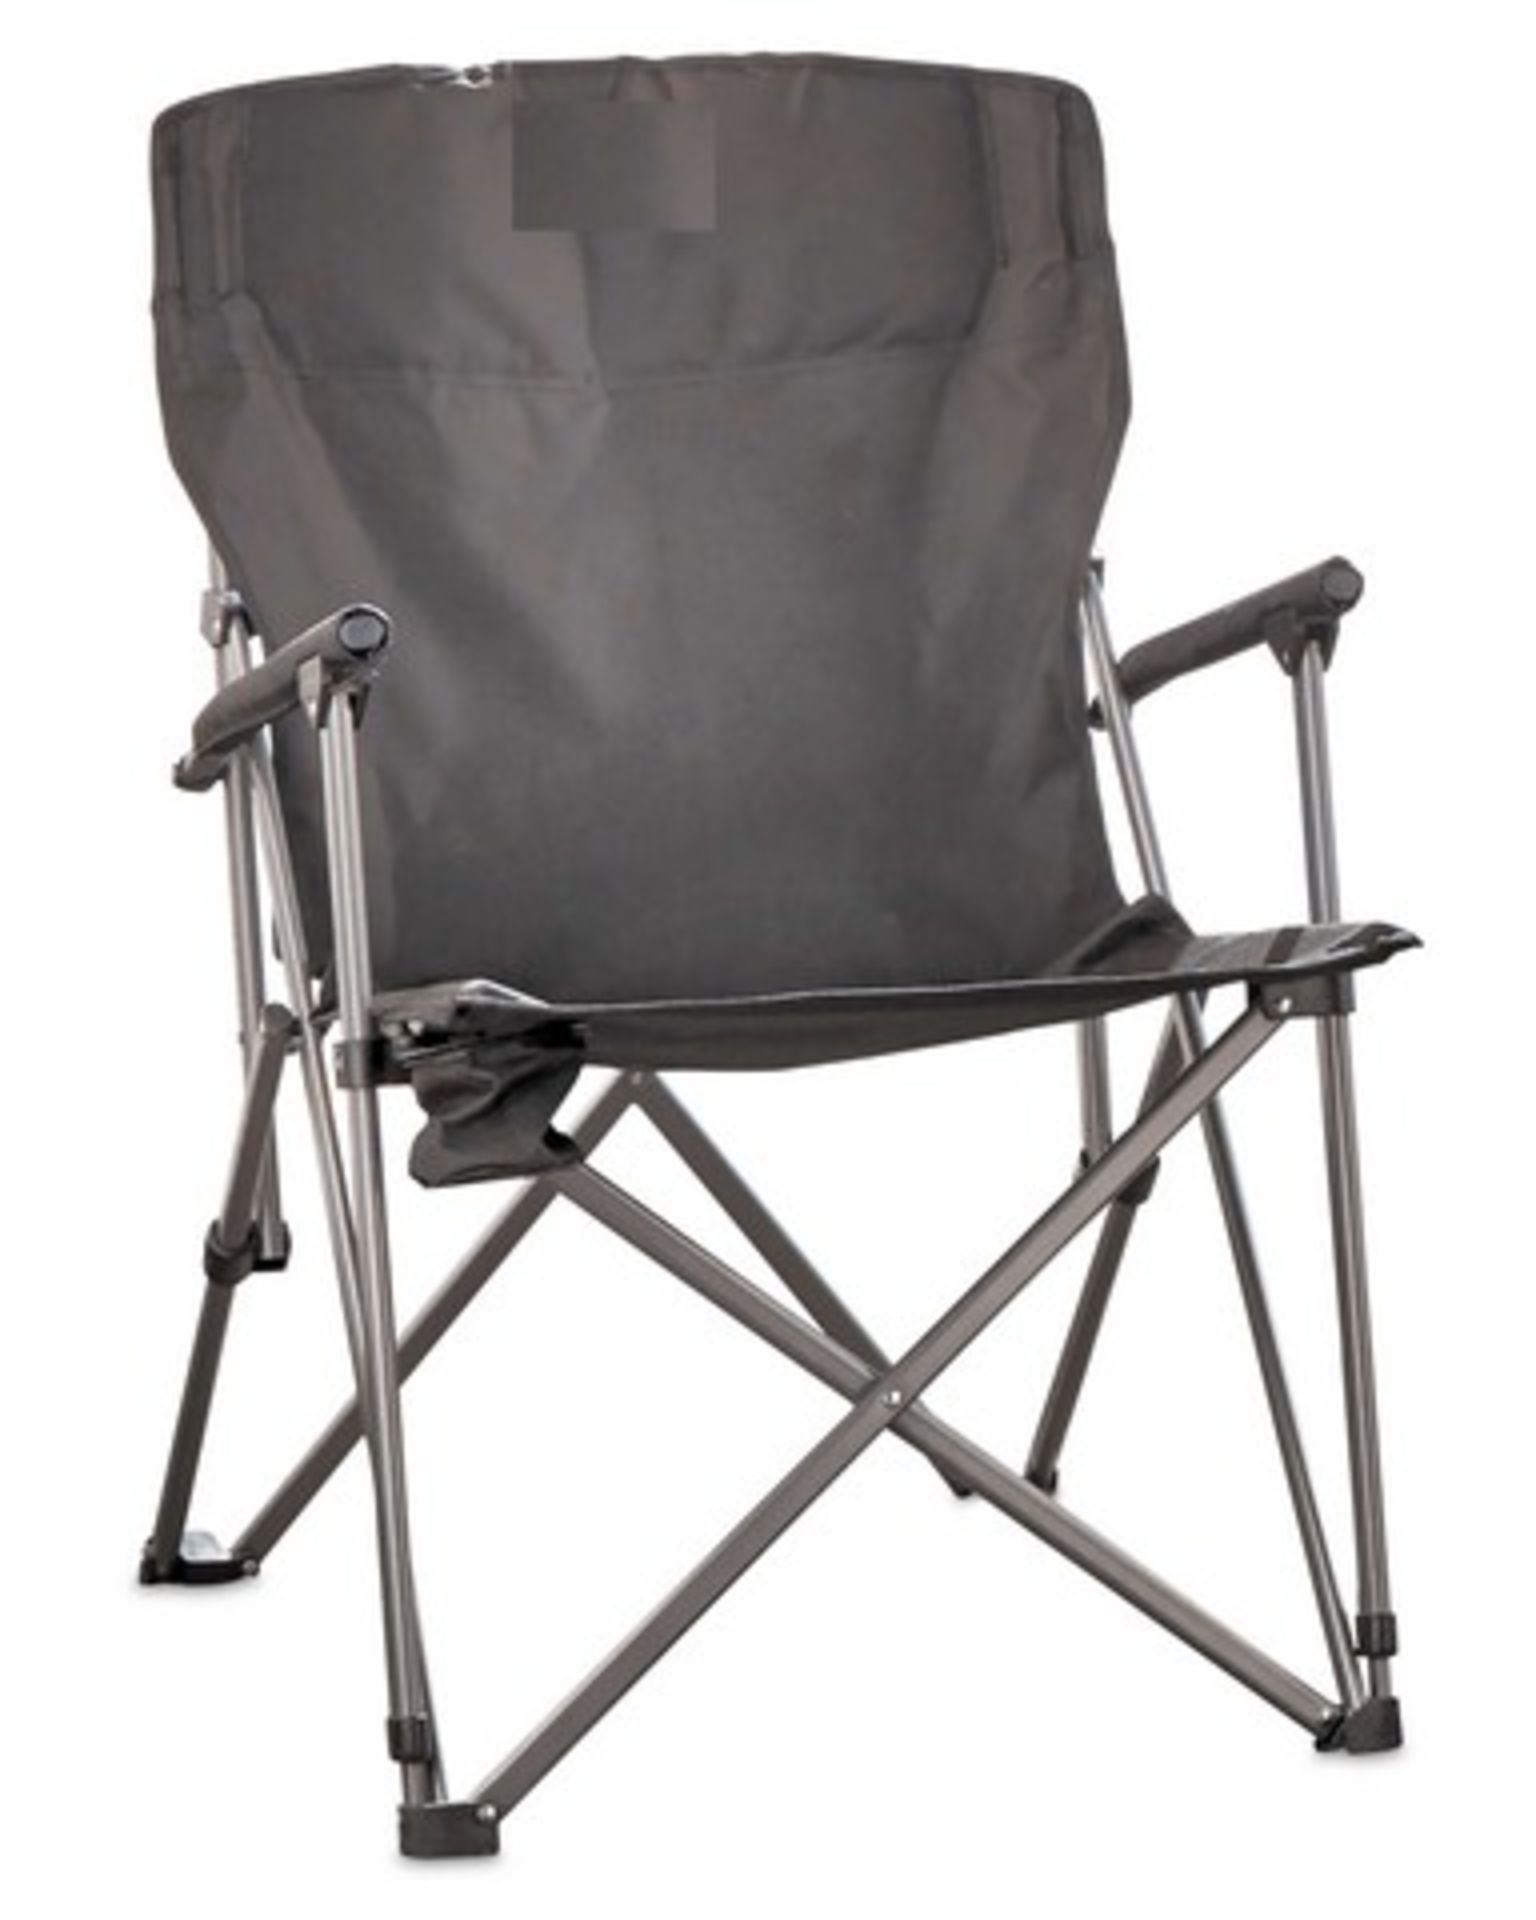 + VAT Brand New Tourer/Expedition Chair In Silver/Black With Carry Case - Lightweight Steel Frame